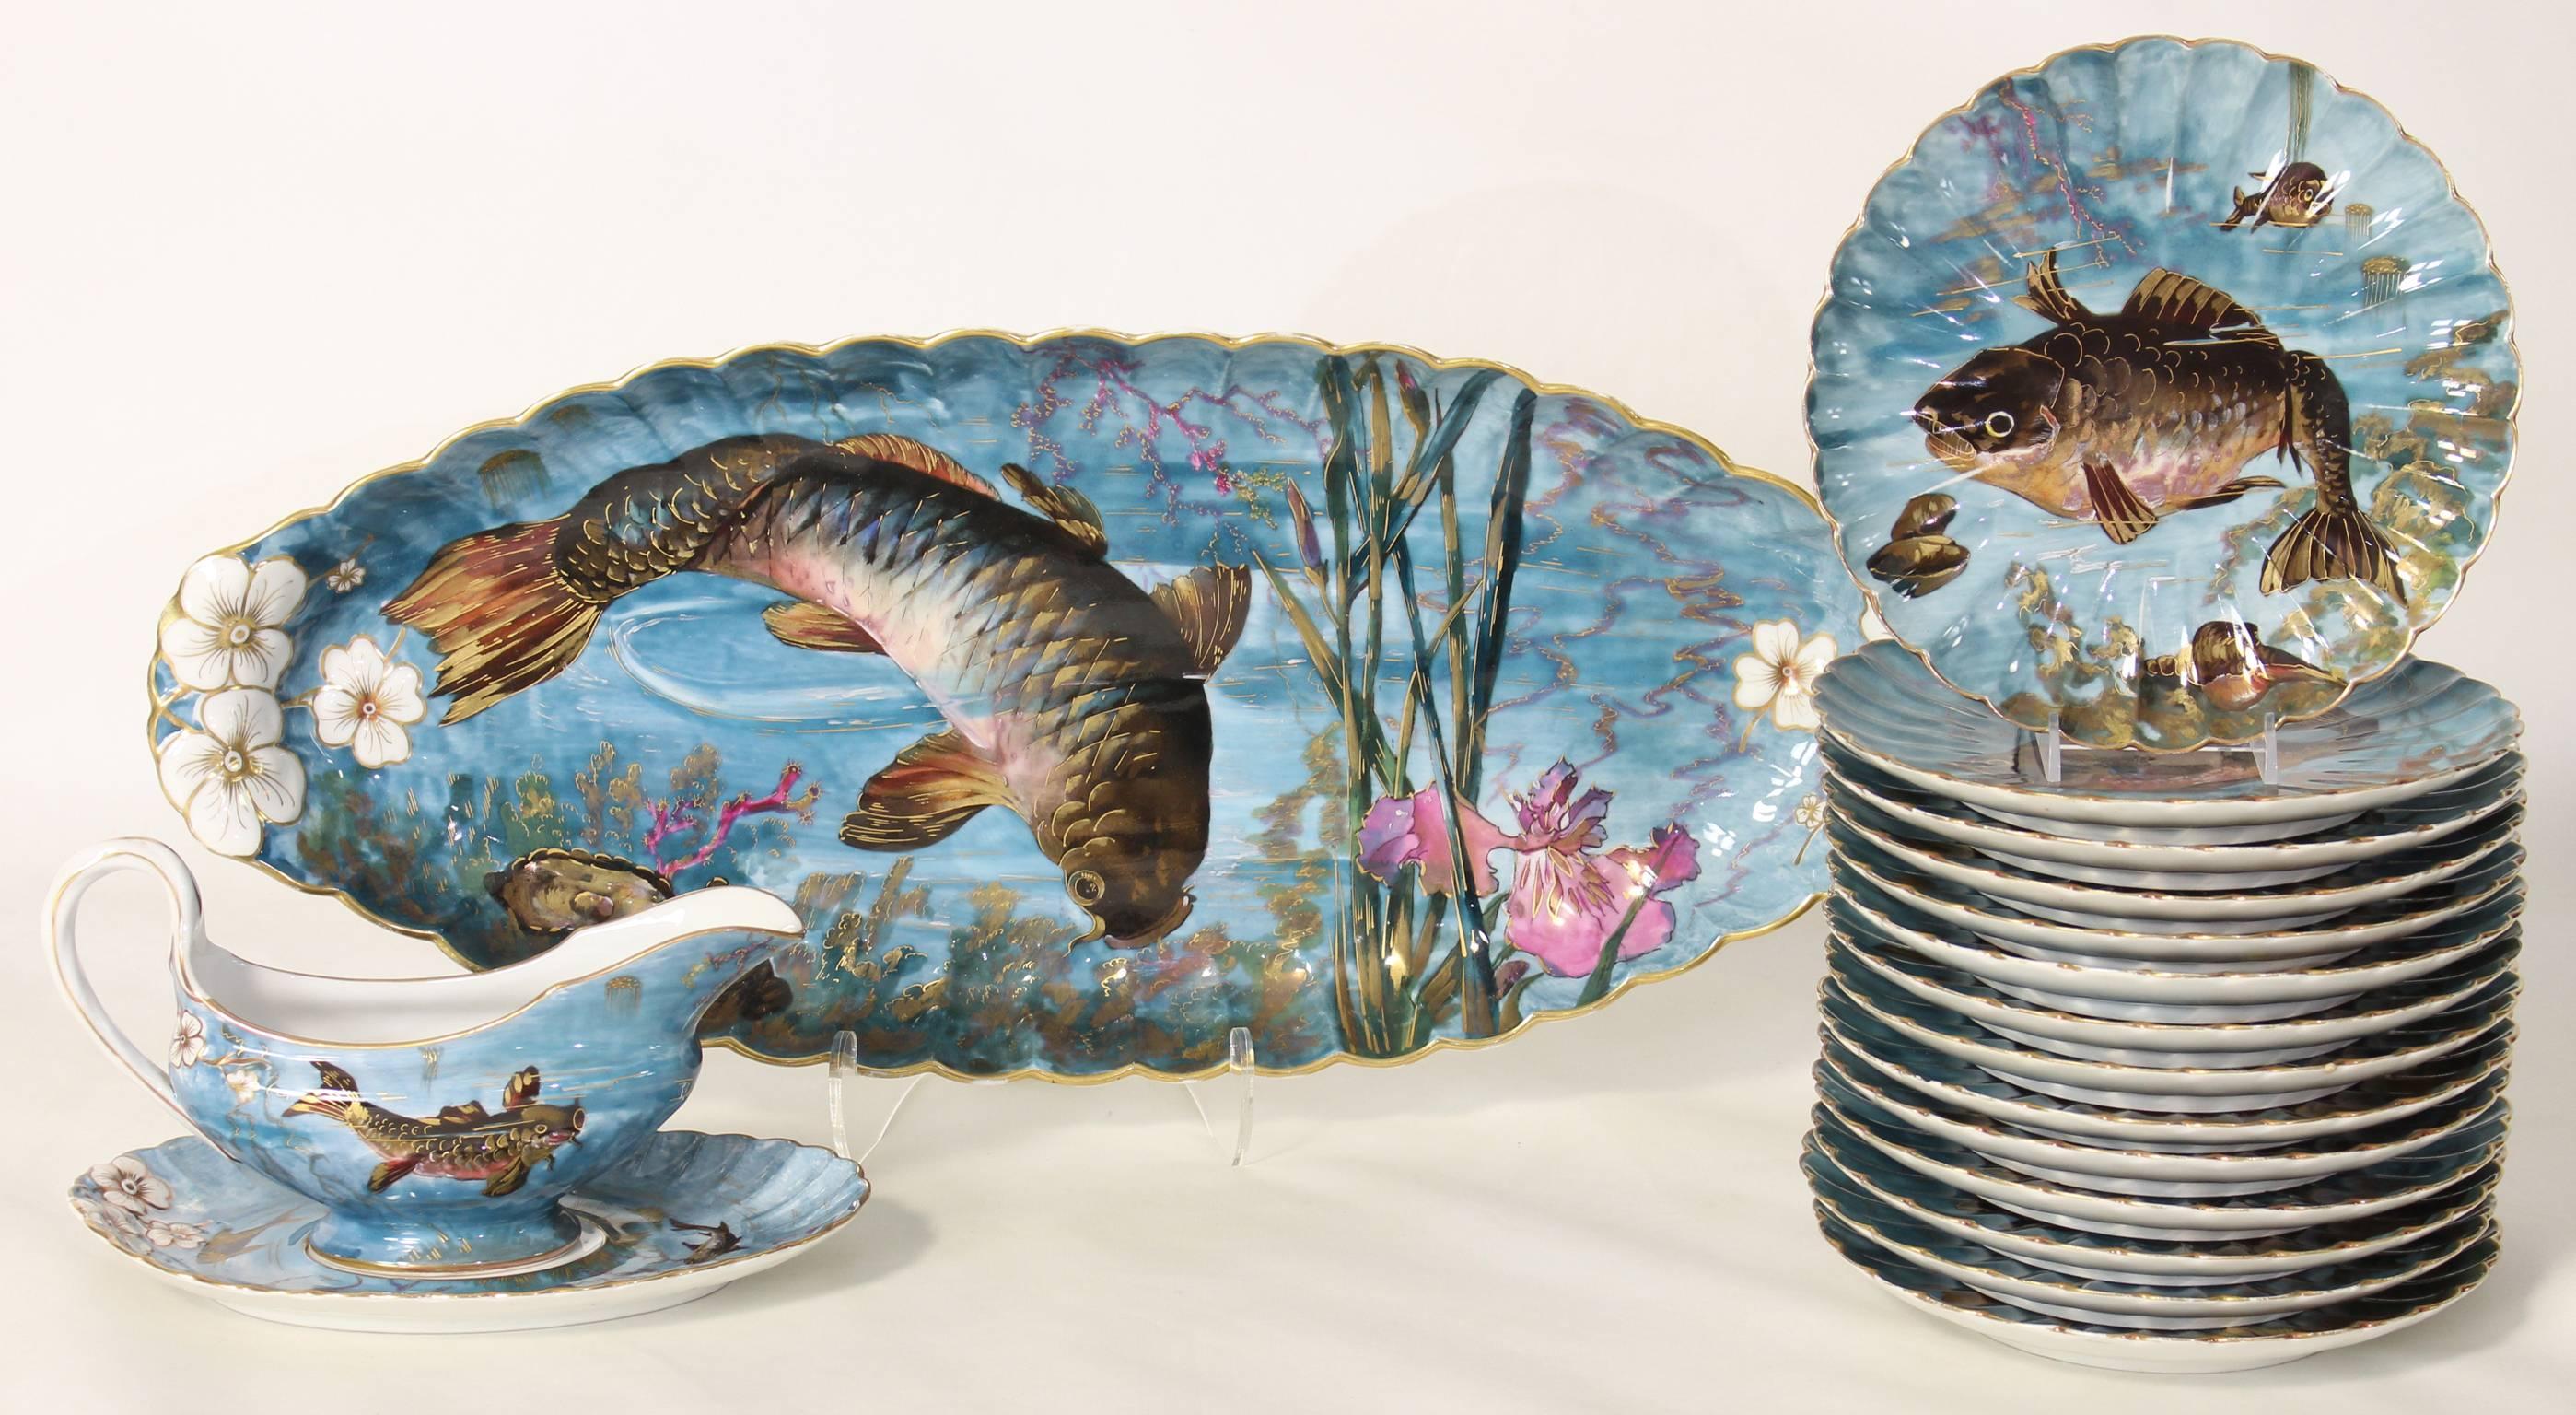 This complete set of elaborately decorated fish service is hand-painted in a rich blue color in the Aesthetic Movement style with all over polychrome enamel. The 14 plates each depict an aquatic scene with a different fish surrounded by lobsters,